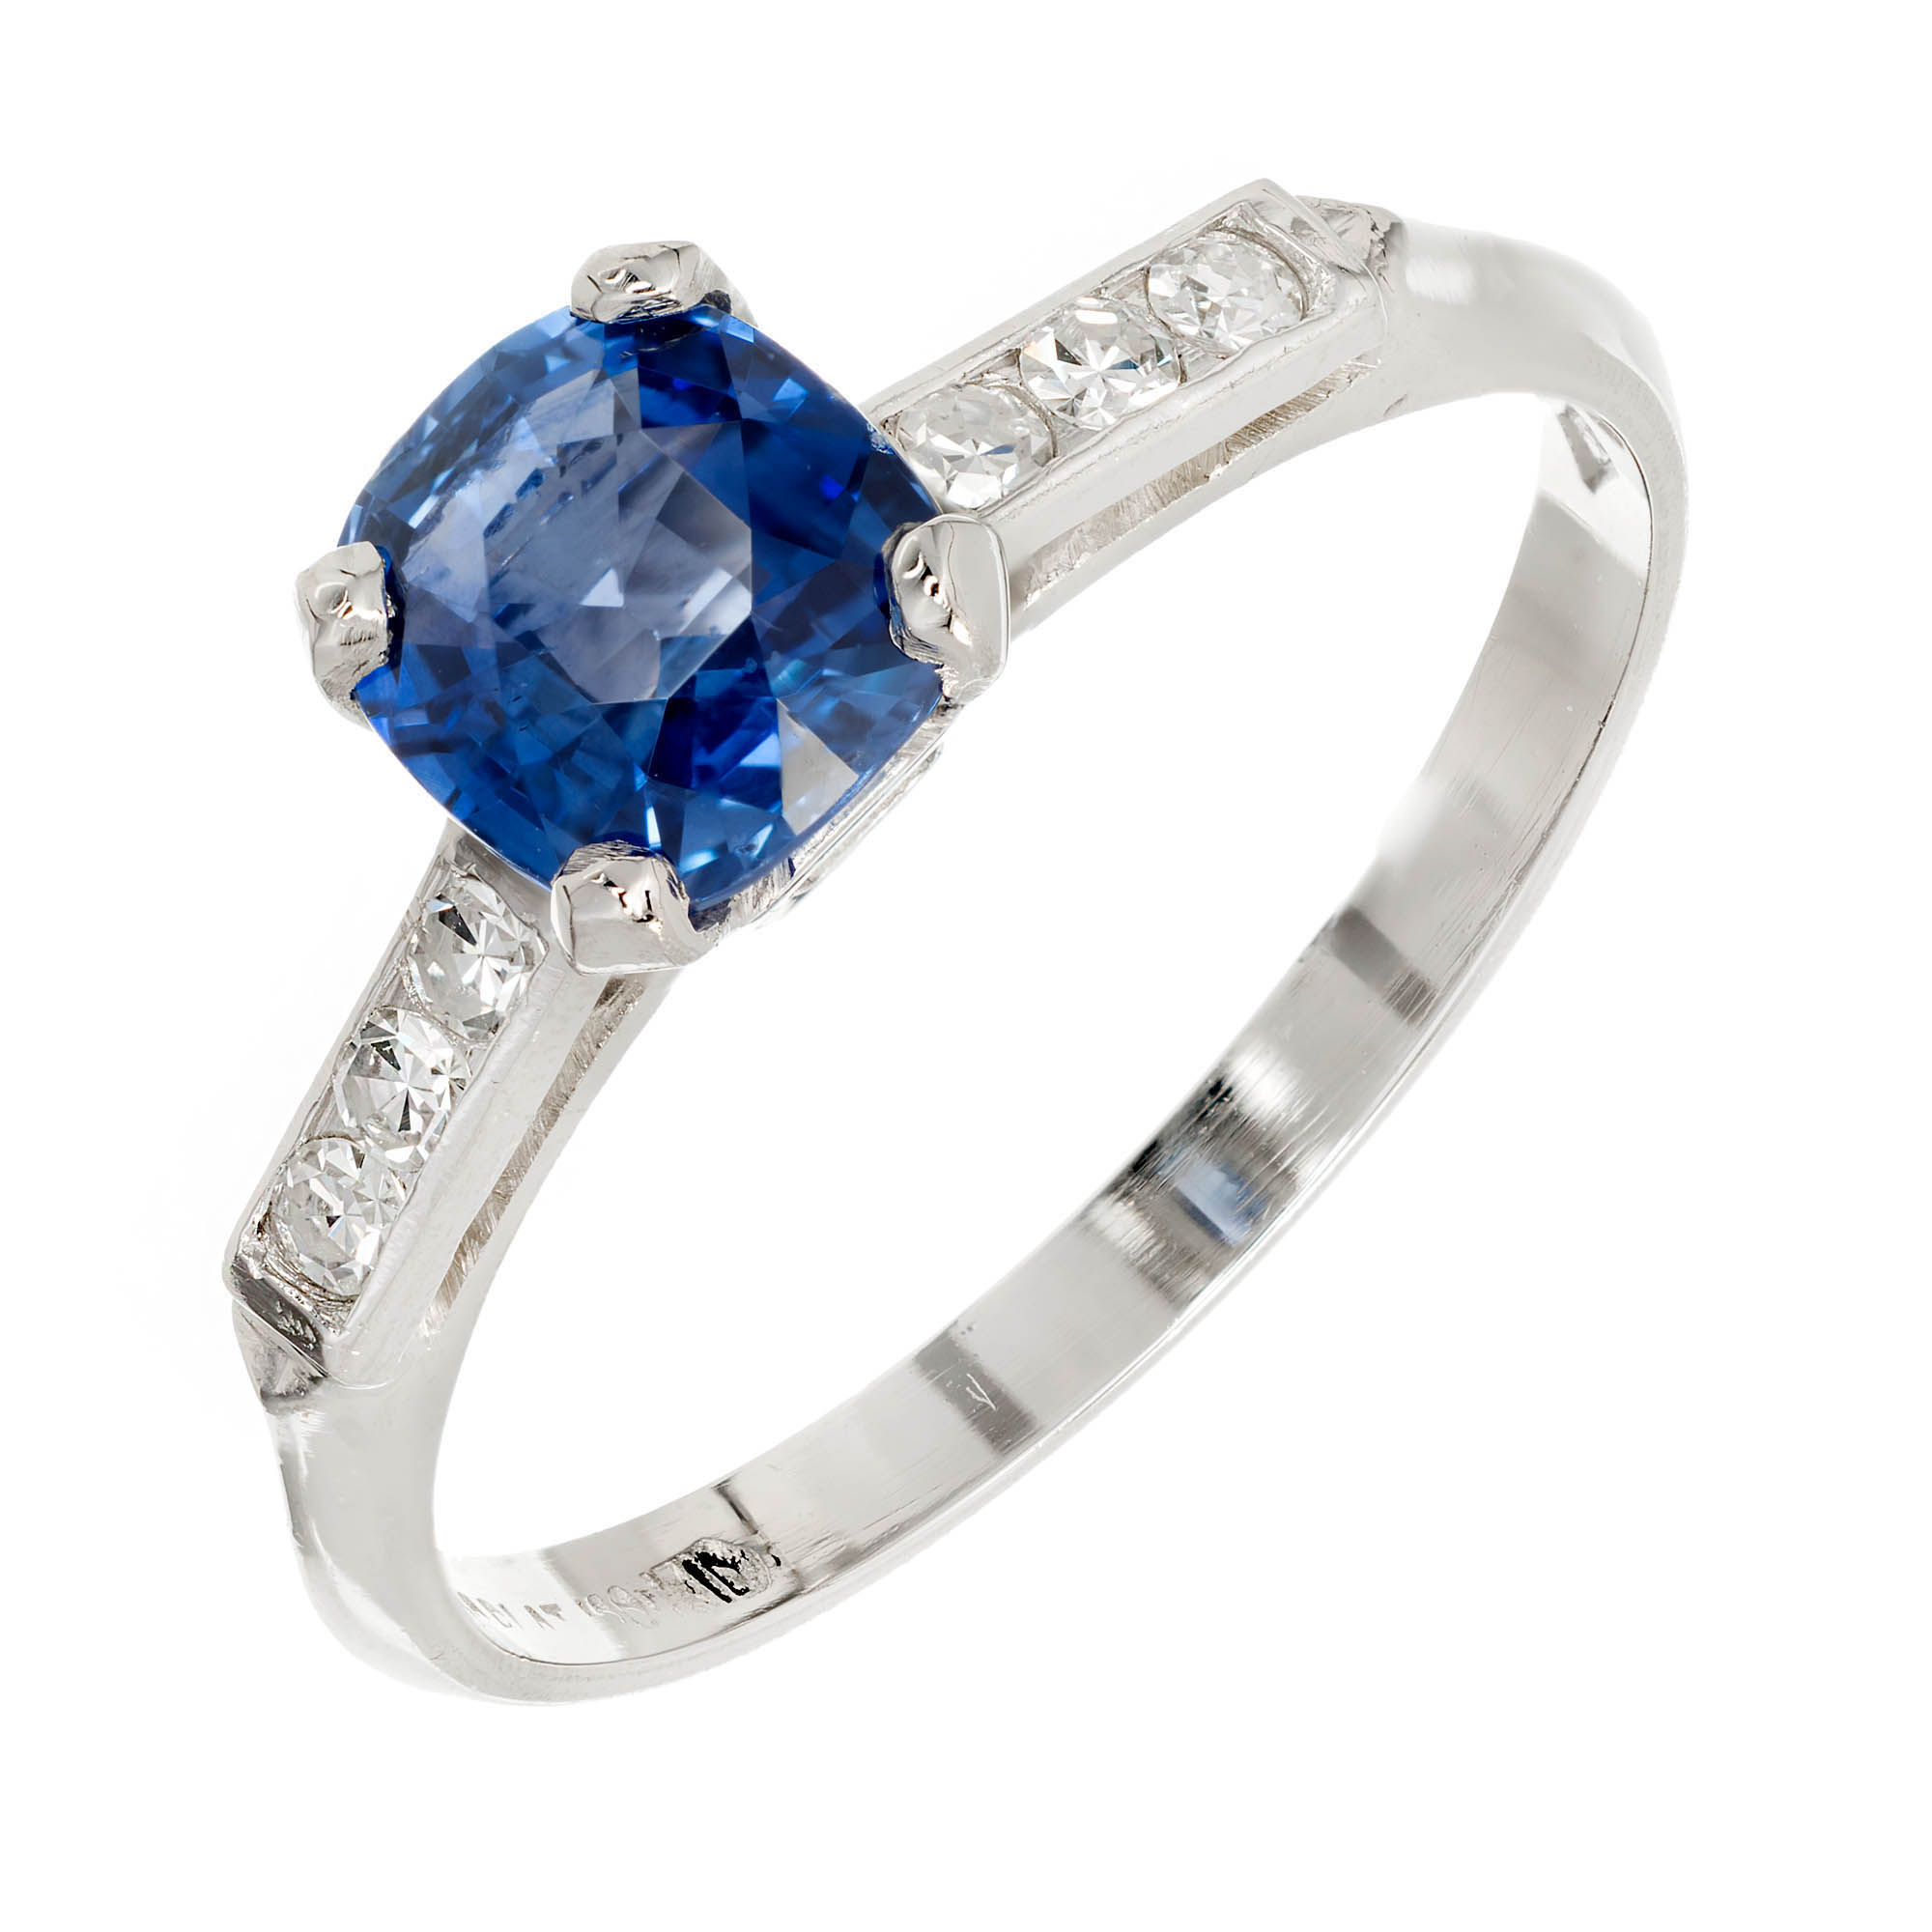 Vintage 1900 1.03ct Blue Sapphire Engagement Ring GIA Certified ...